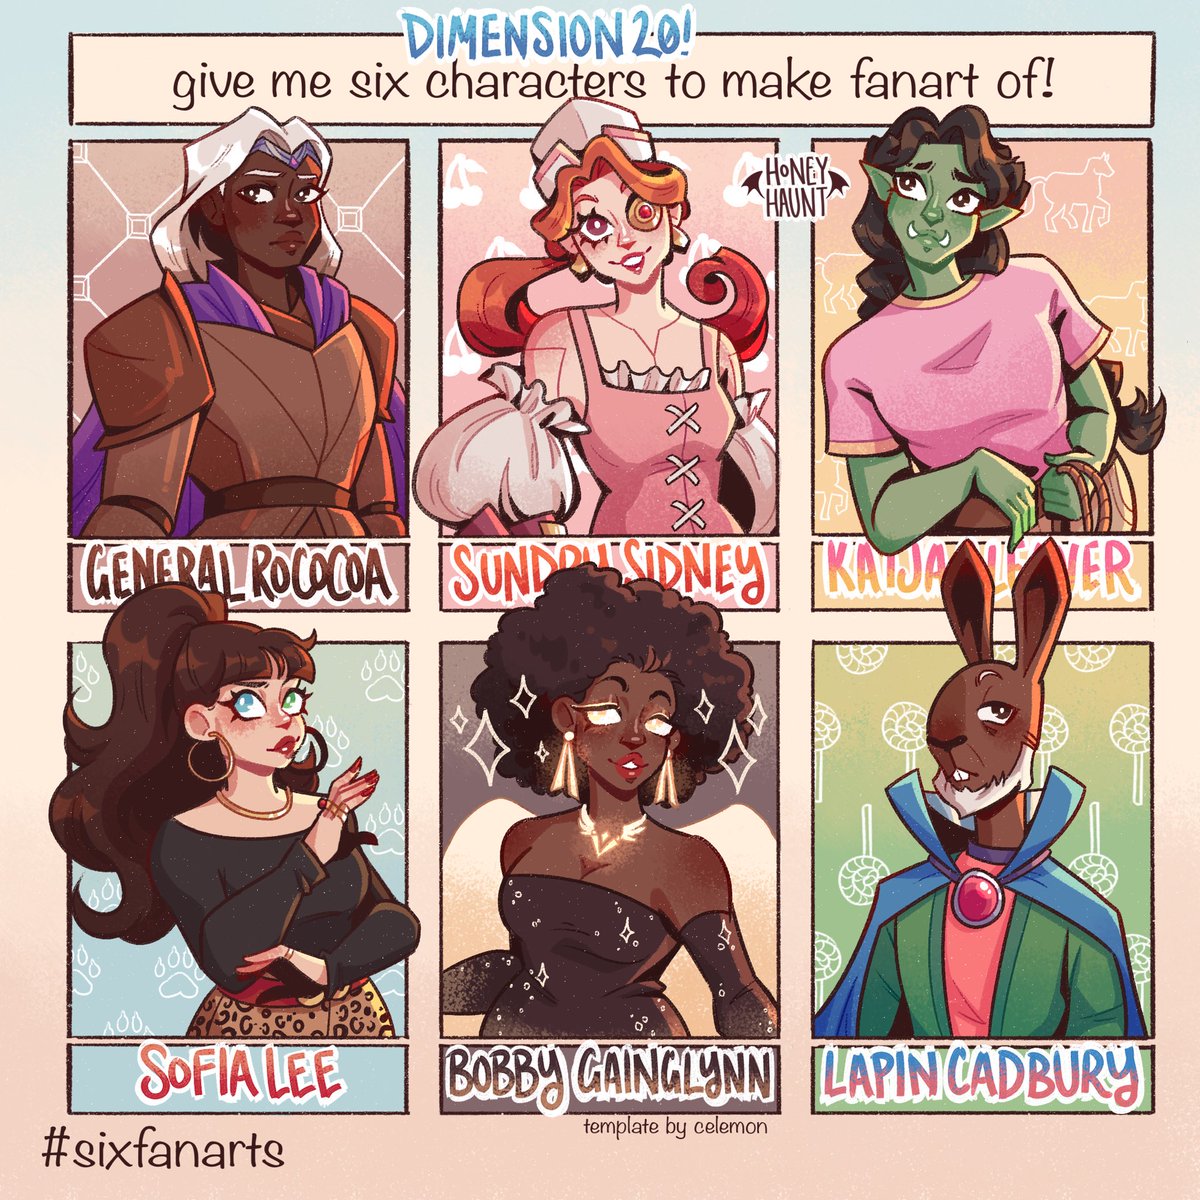 #sixfanarts dimension 20 edition! this made me wanna draw all the rocks sisters and redraw all of the seven maidens 🤔 #fantasyhigh #acrownofcandy #starstruckodyssey #theunsleepingcity #piratesofleviathan